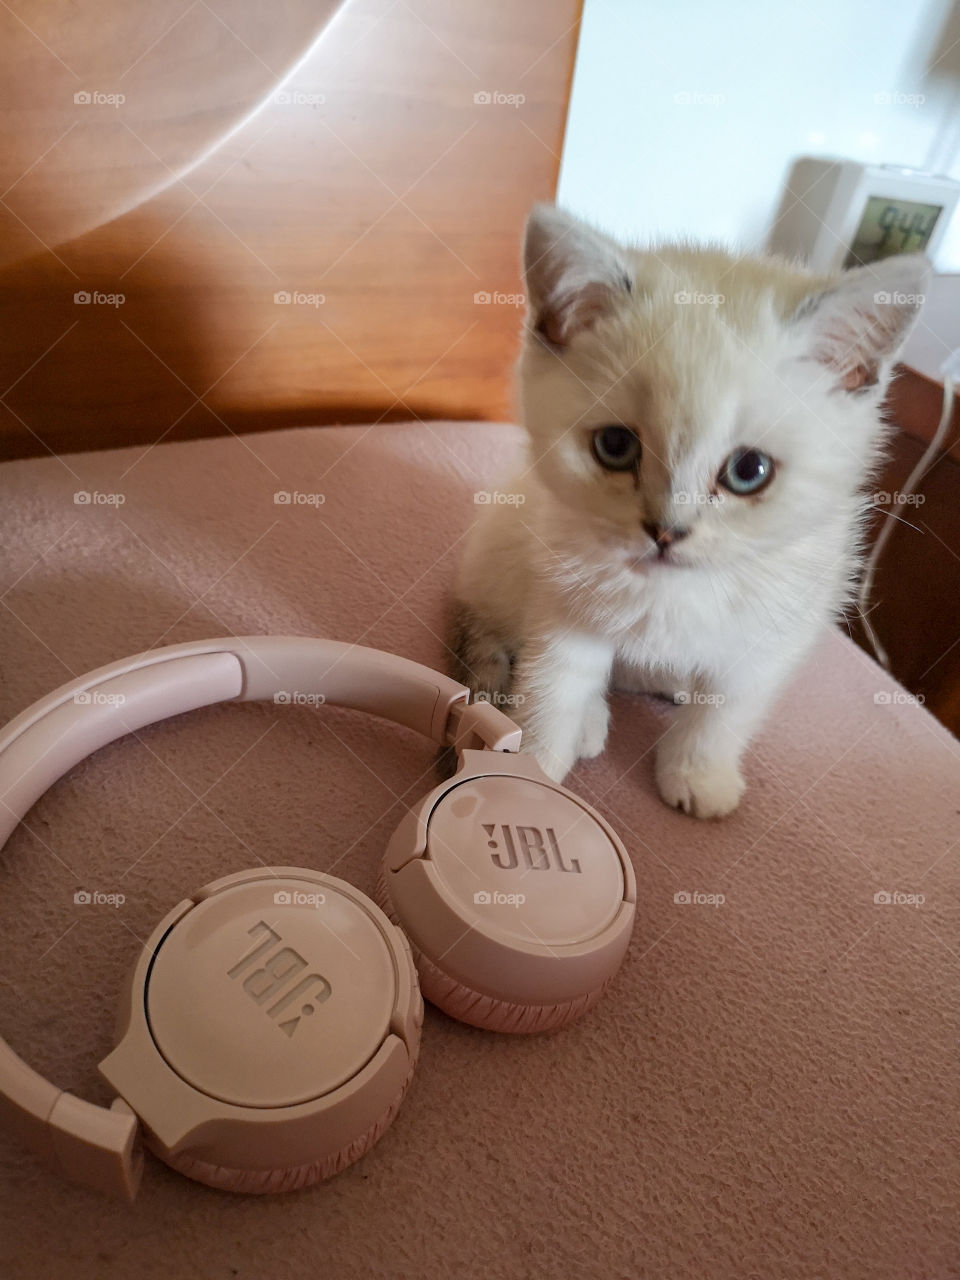 My cat and my JBL